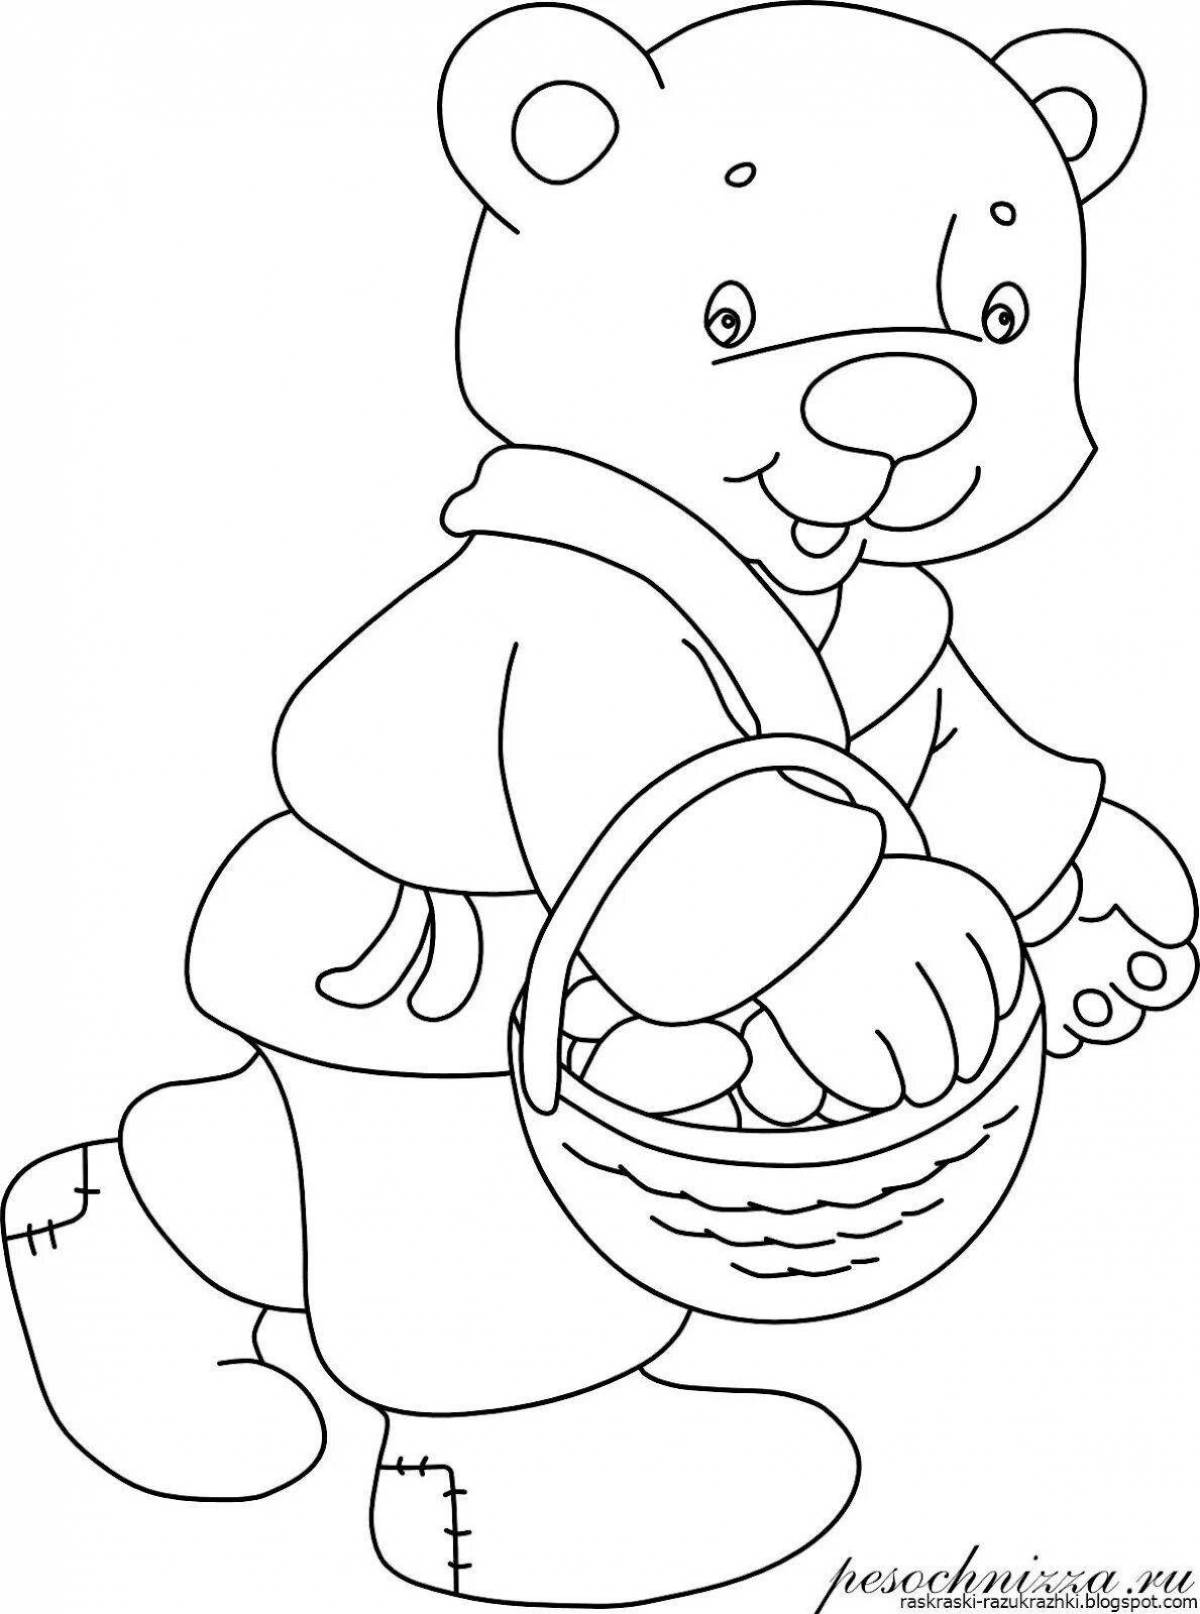 Coloring page jolly tramp